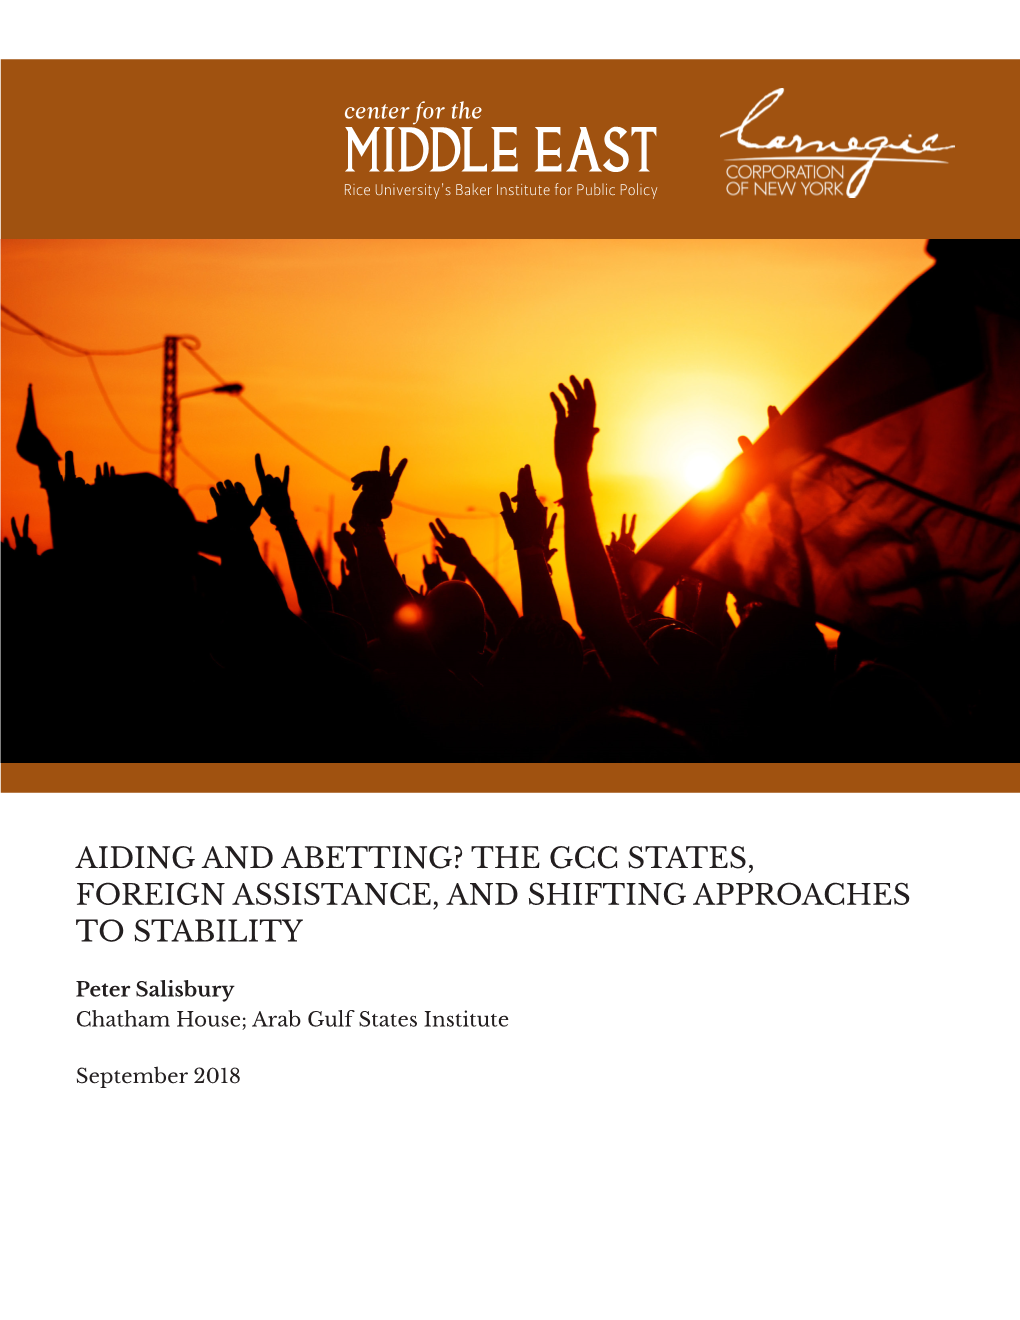 The Gcc States, Foreign Assistance, and Shifting Approaches to Stability